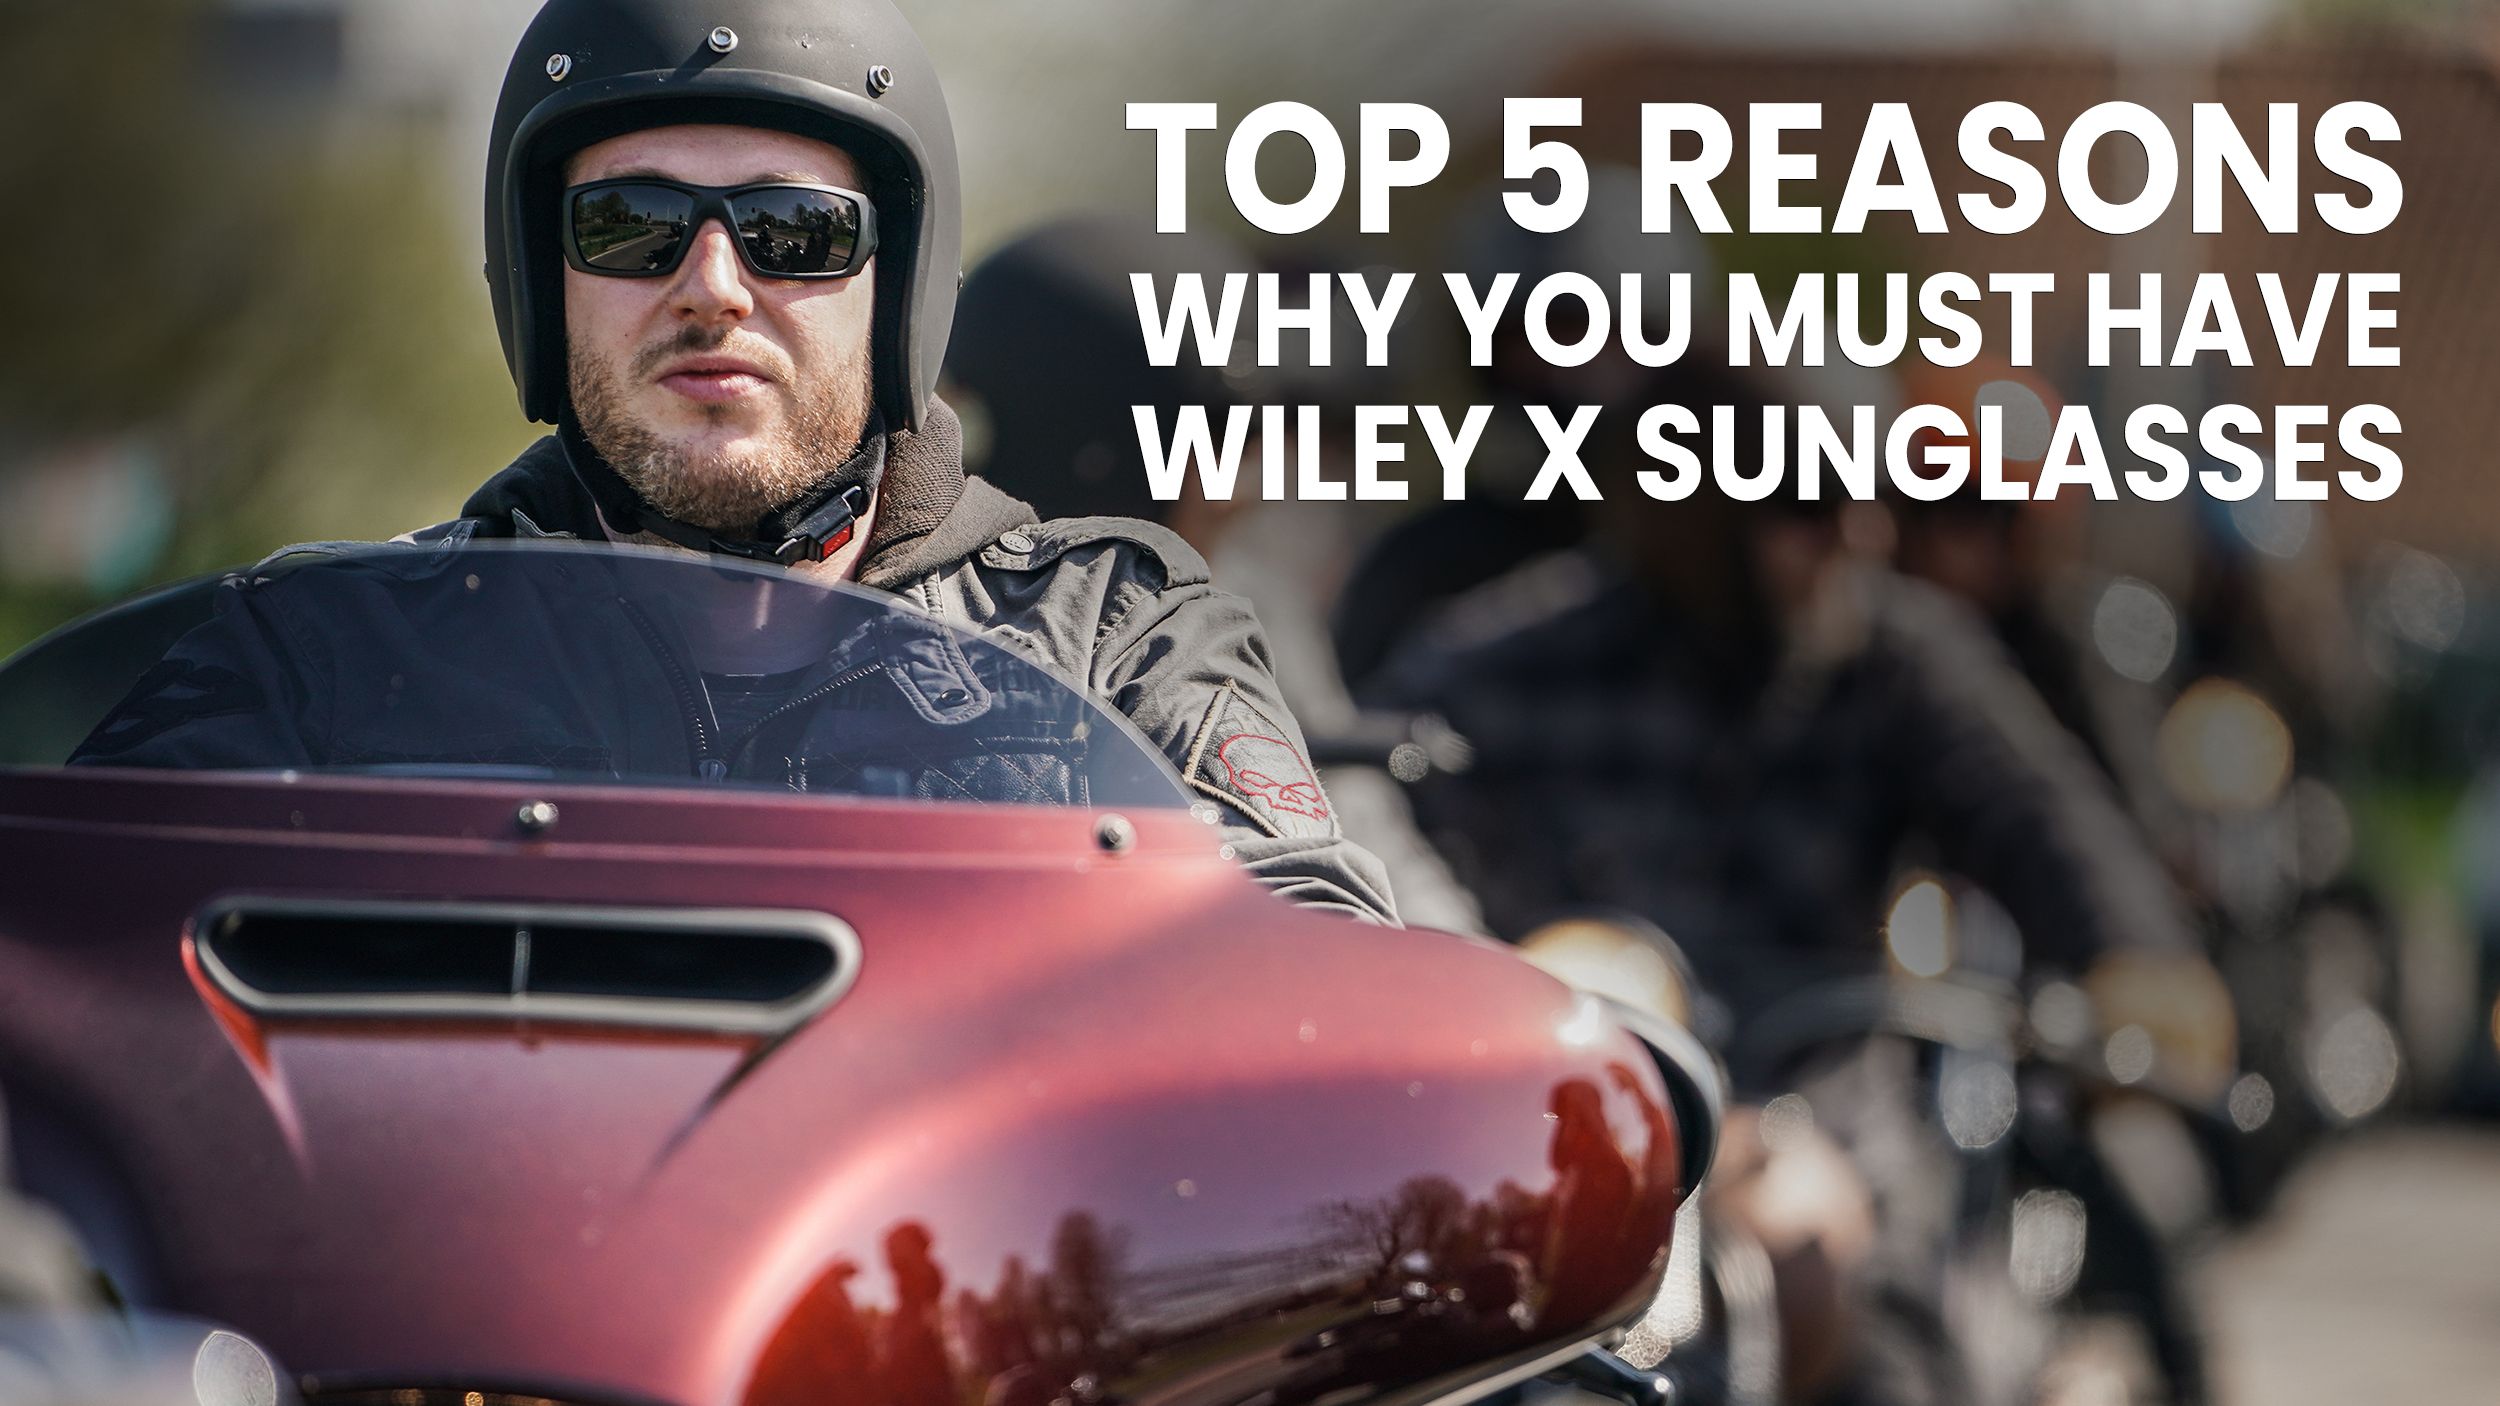 5 Reasons Why Wiley X Sunglasses Are a Must-Have Header